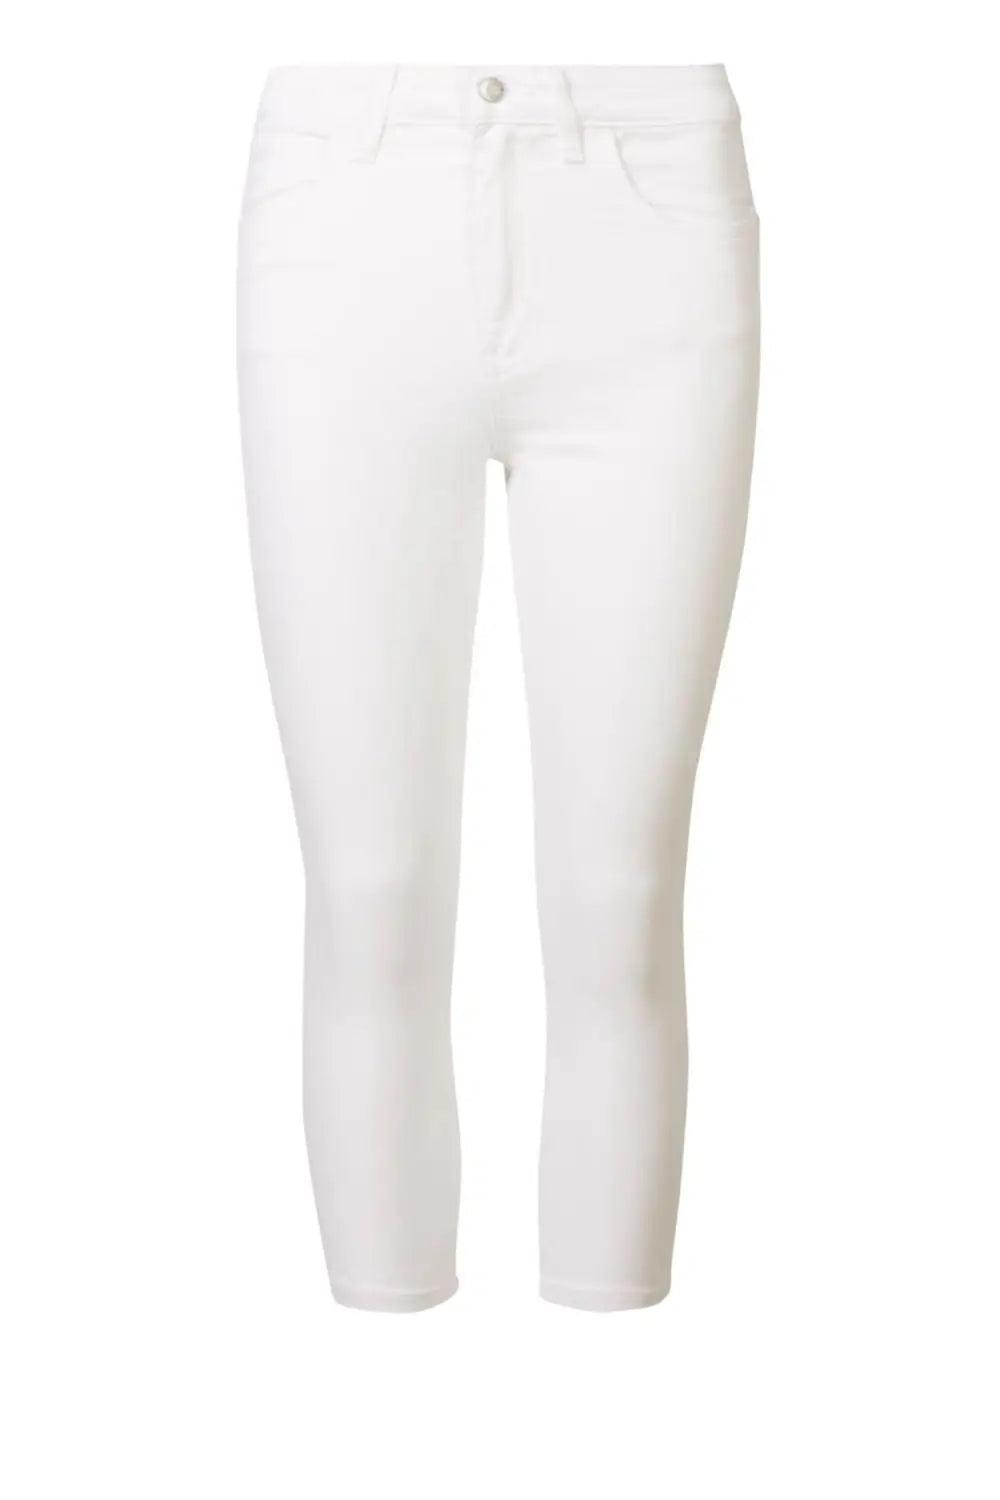 M&S Super Skinny Cropped Jeans